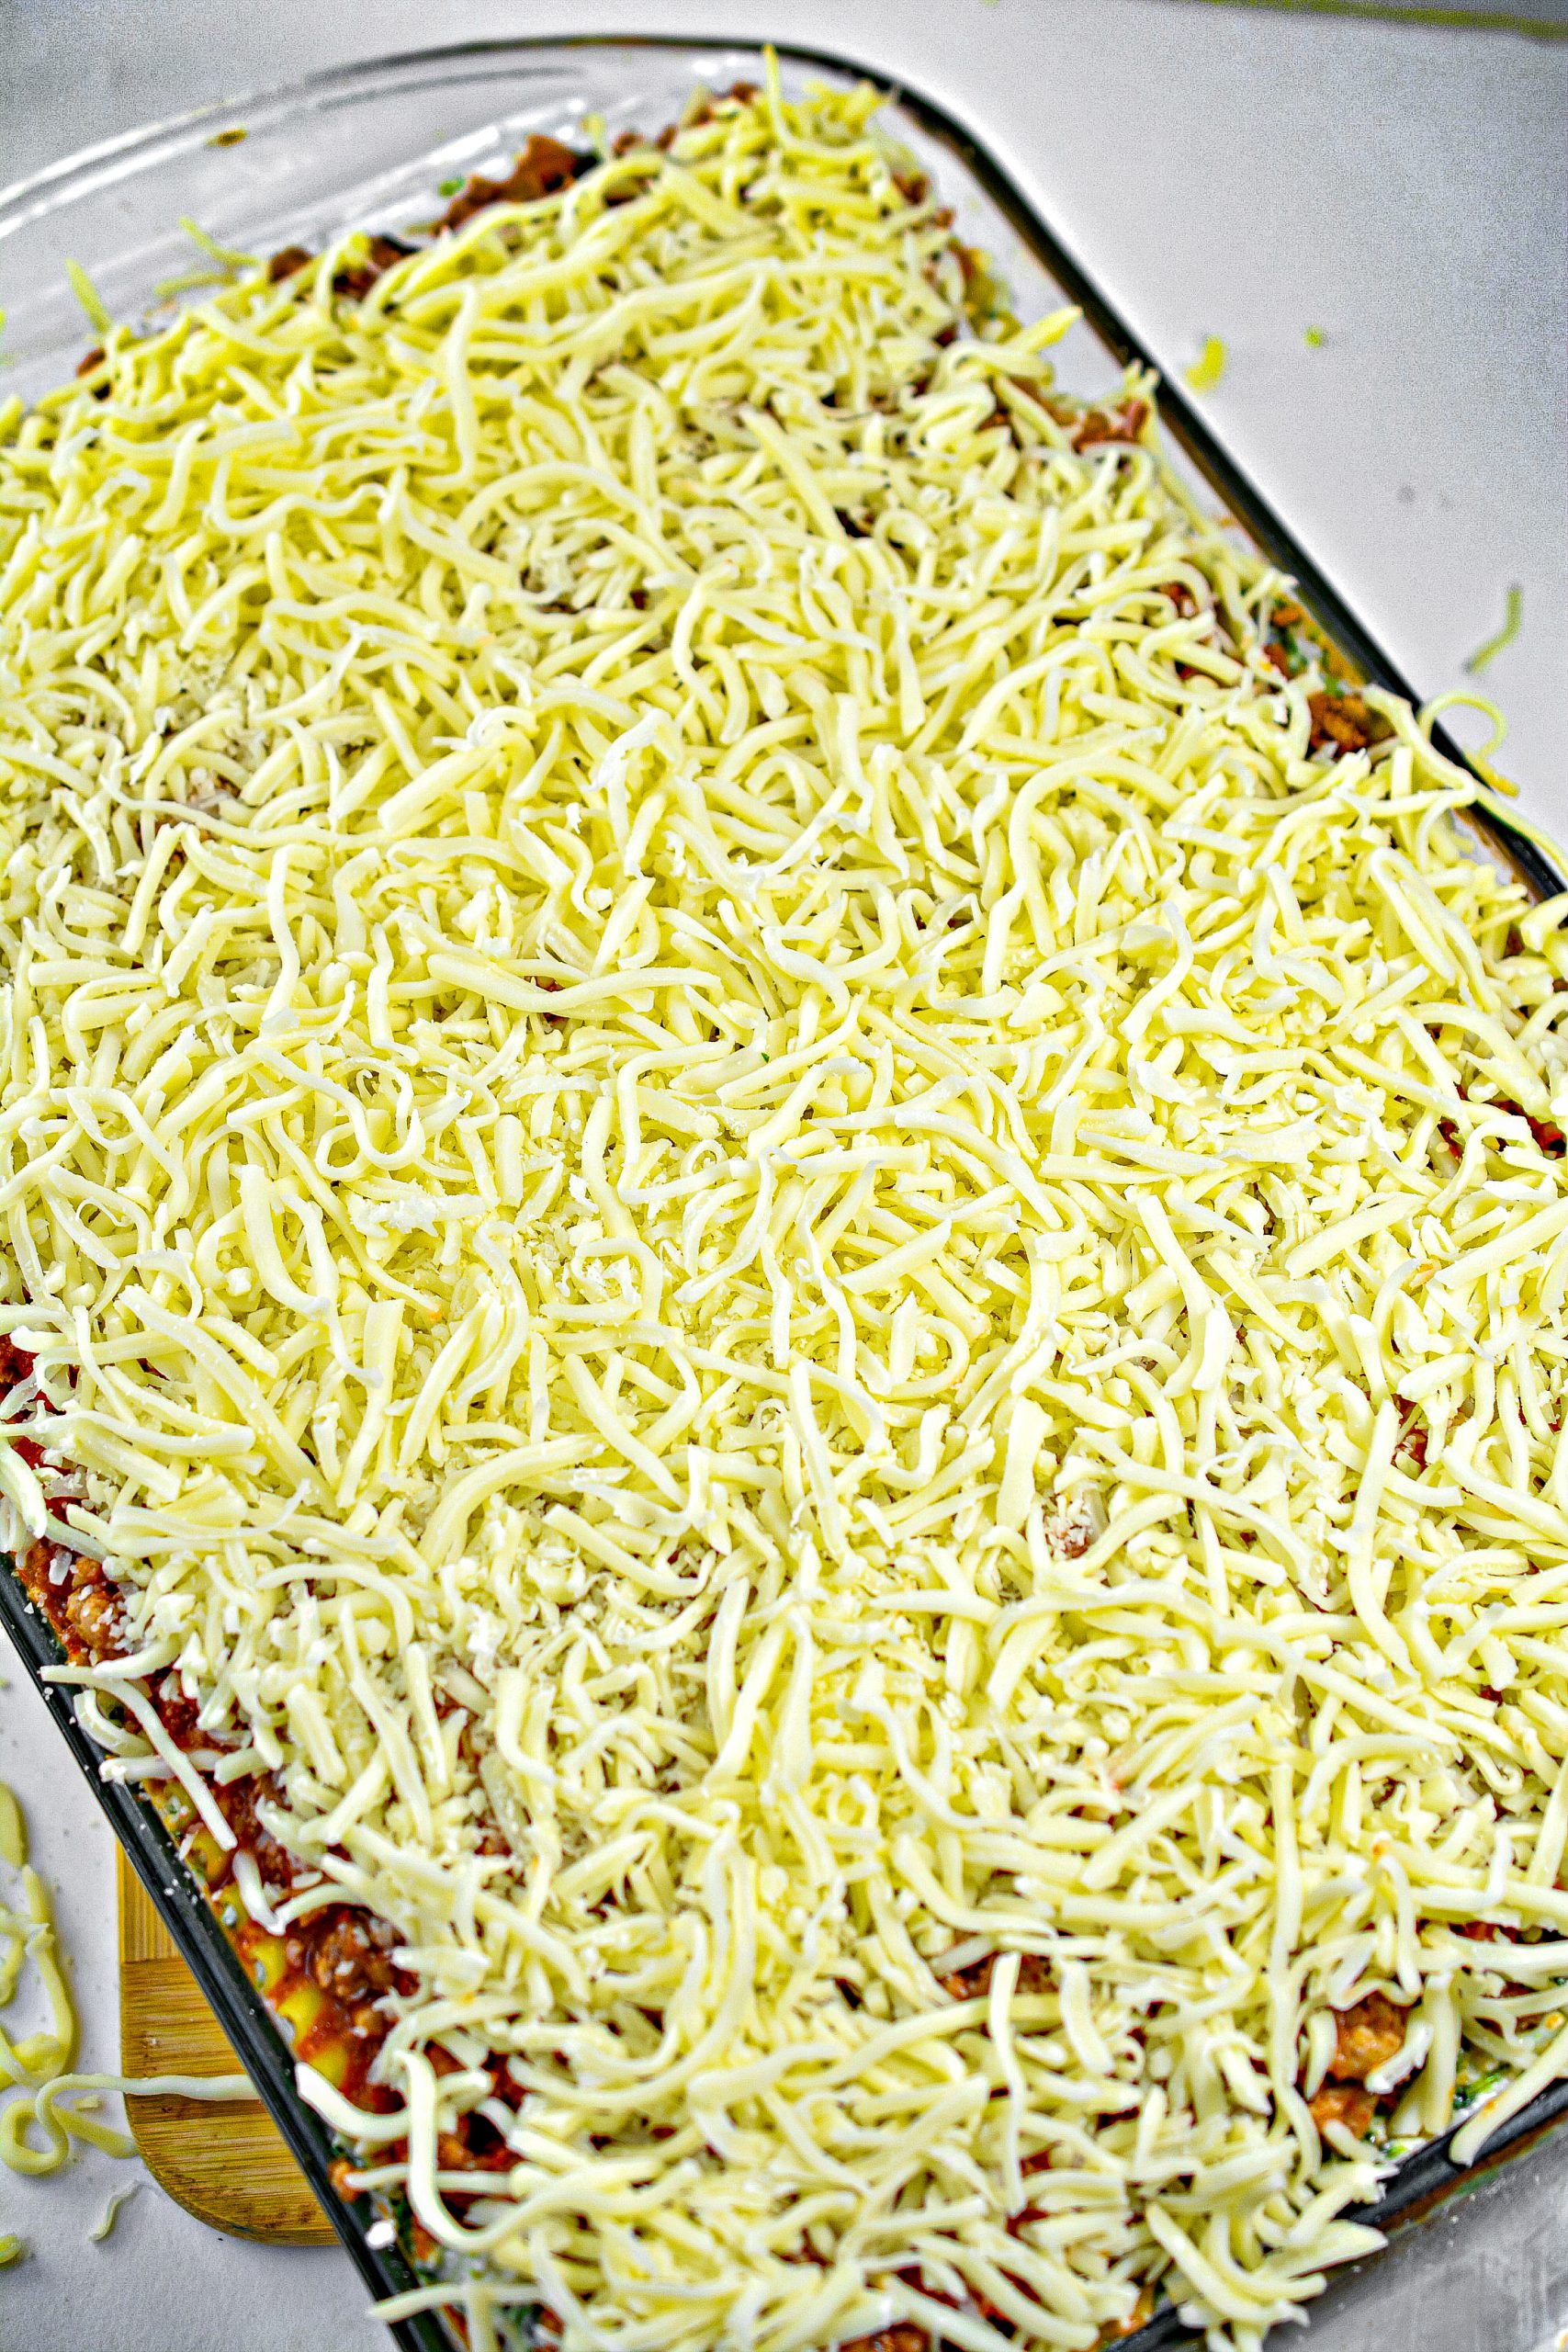 Repeat with a layer of noodles, then the other ½ of the cheese mixture, 2 more cups of cheese and ⅓ of the meat mixture.